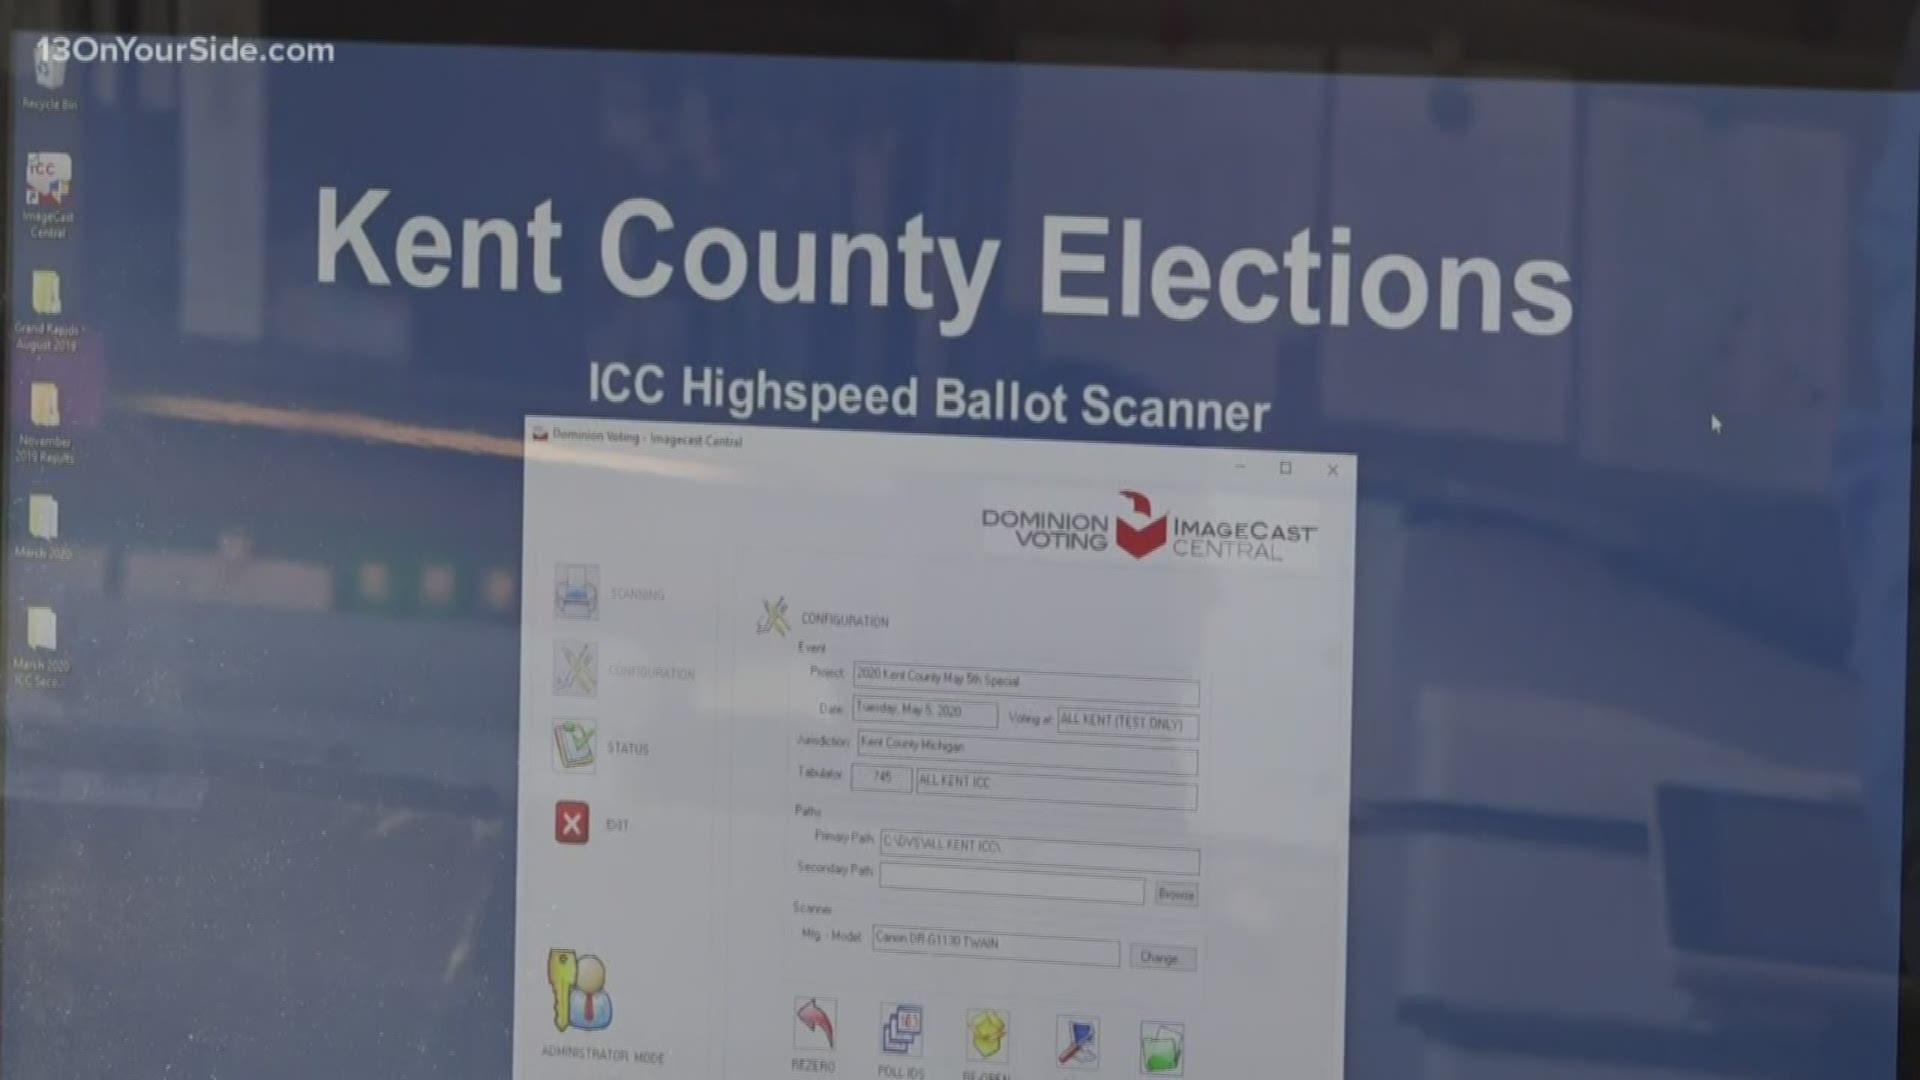 People can now cast an absentee ballot without needing an excuse.